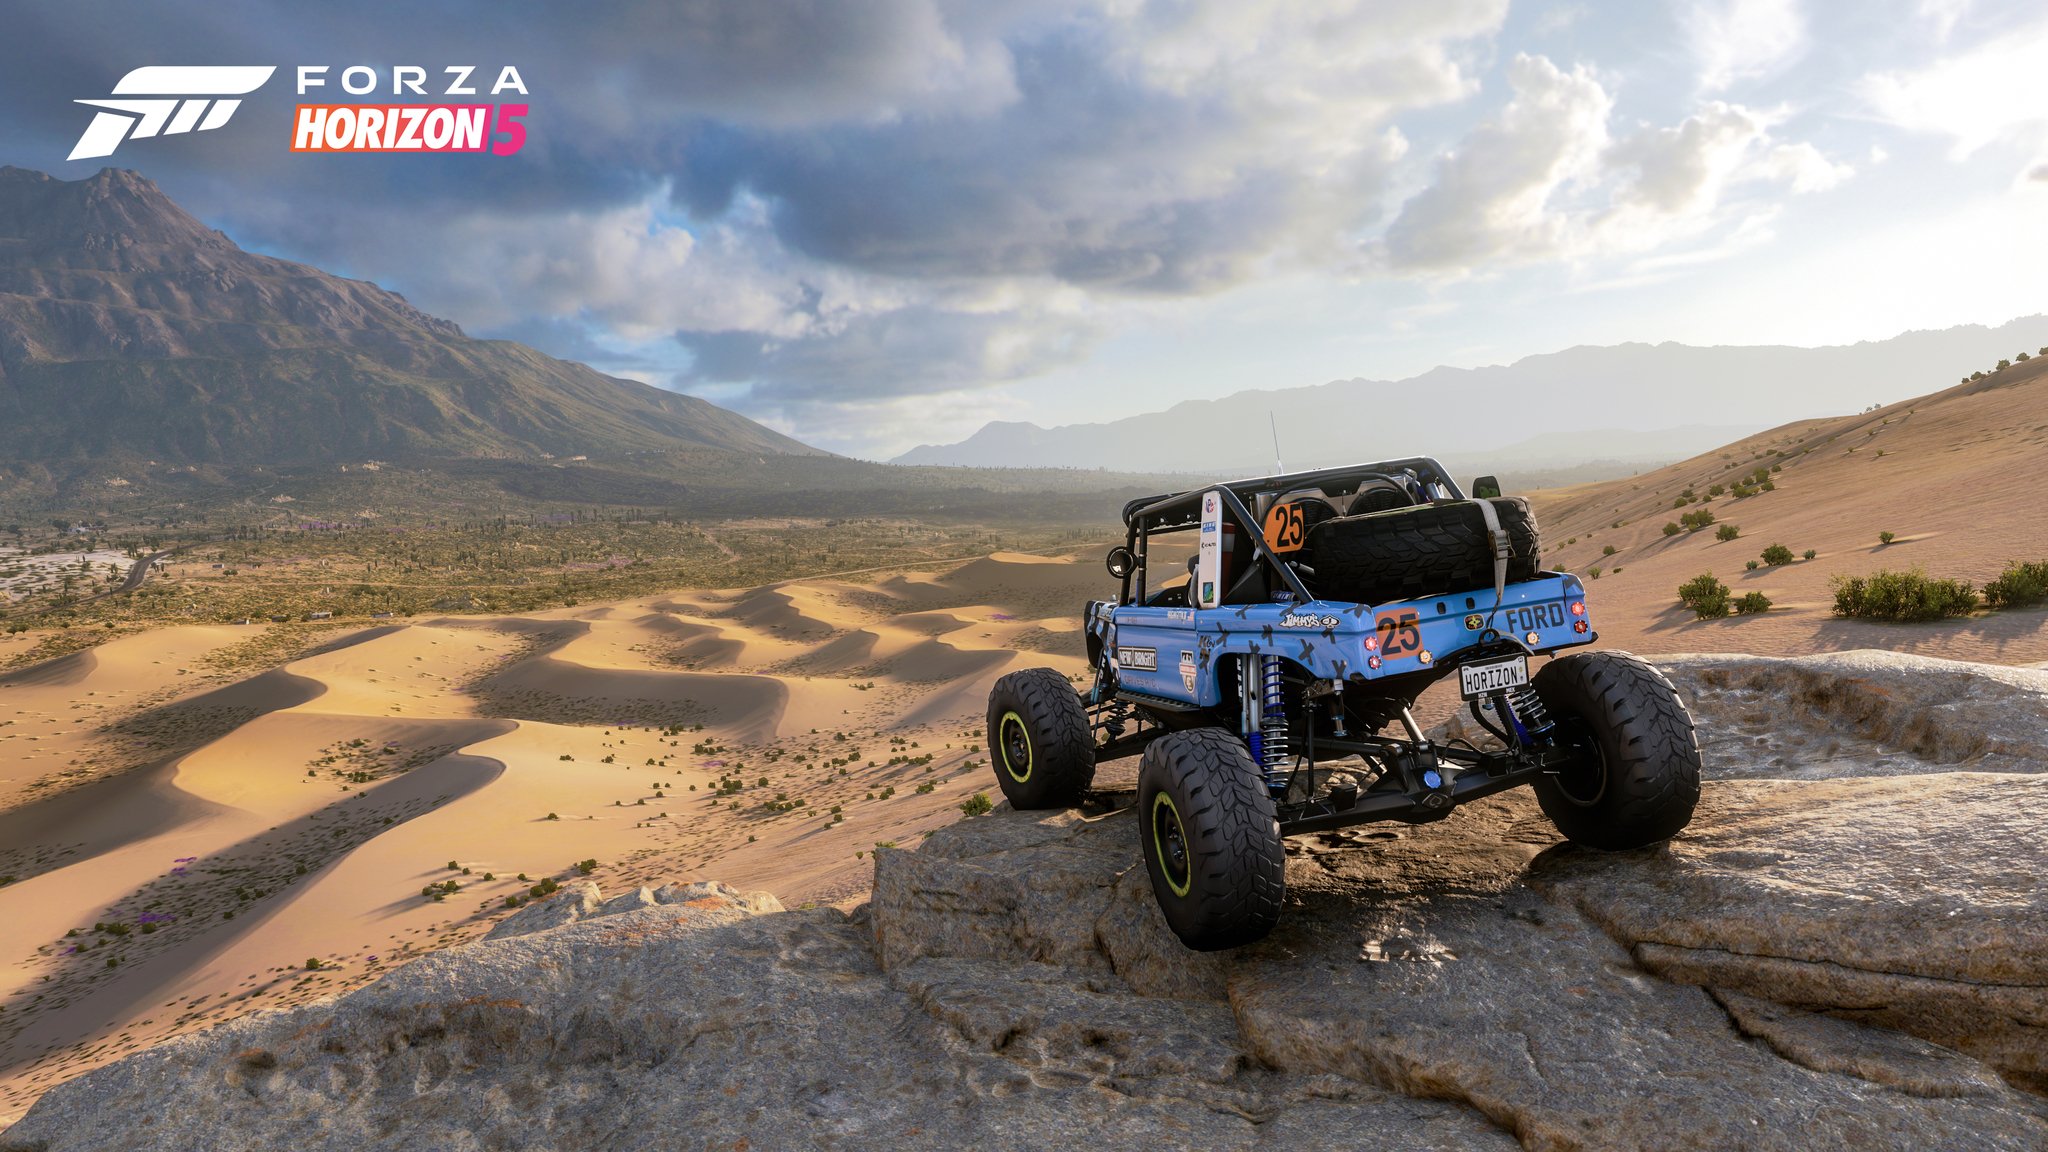 The latest Forza Horizon 5 patch update introduced some new issues